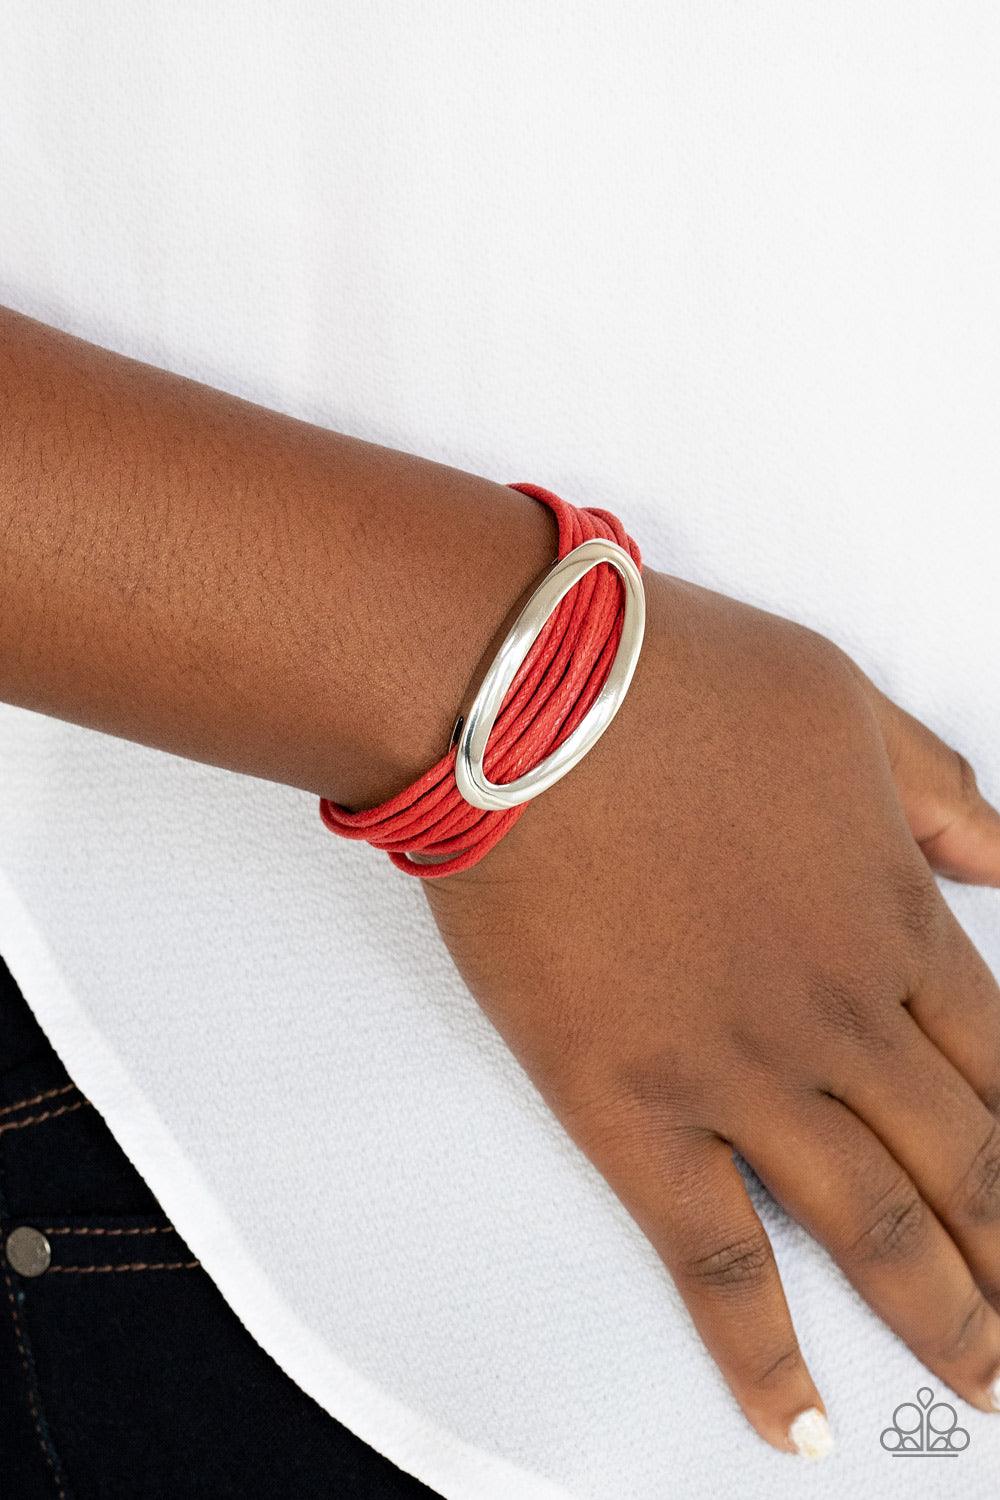 Paparazzi Accessories Corded Couture - Red An oval silver fitting glides along strands of red cording, creating colorful layers around the wrist. Features a magnetic closure. Sold as one individual bracelet. Jewelry